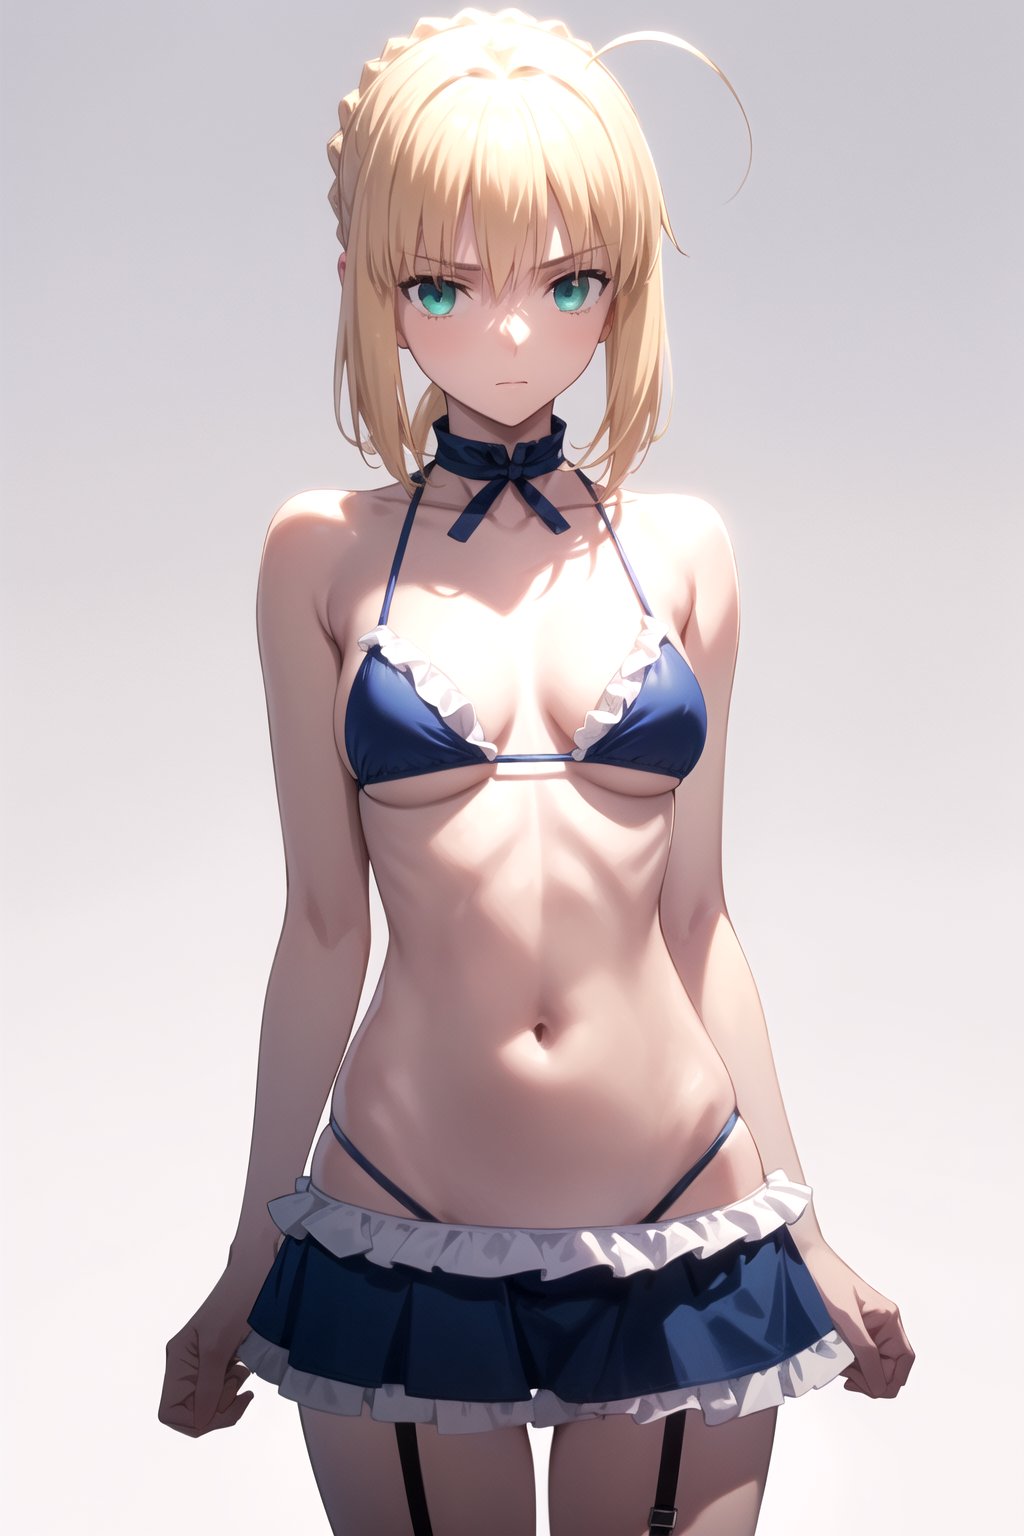 //Quality,
masterpiece, best quality
,//Character,
1girl, solo
,//Fashion,
,//Background,
white_background, simple_background, blank_background
,//Others,
,phSaber, phAltoria, micro_bikini, thigh_straps, hair down, blurry, frills,